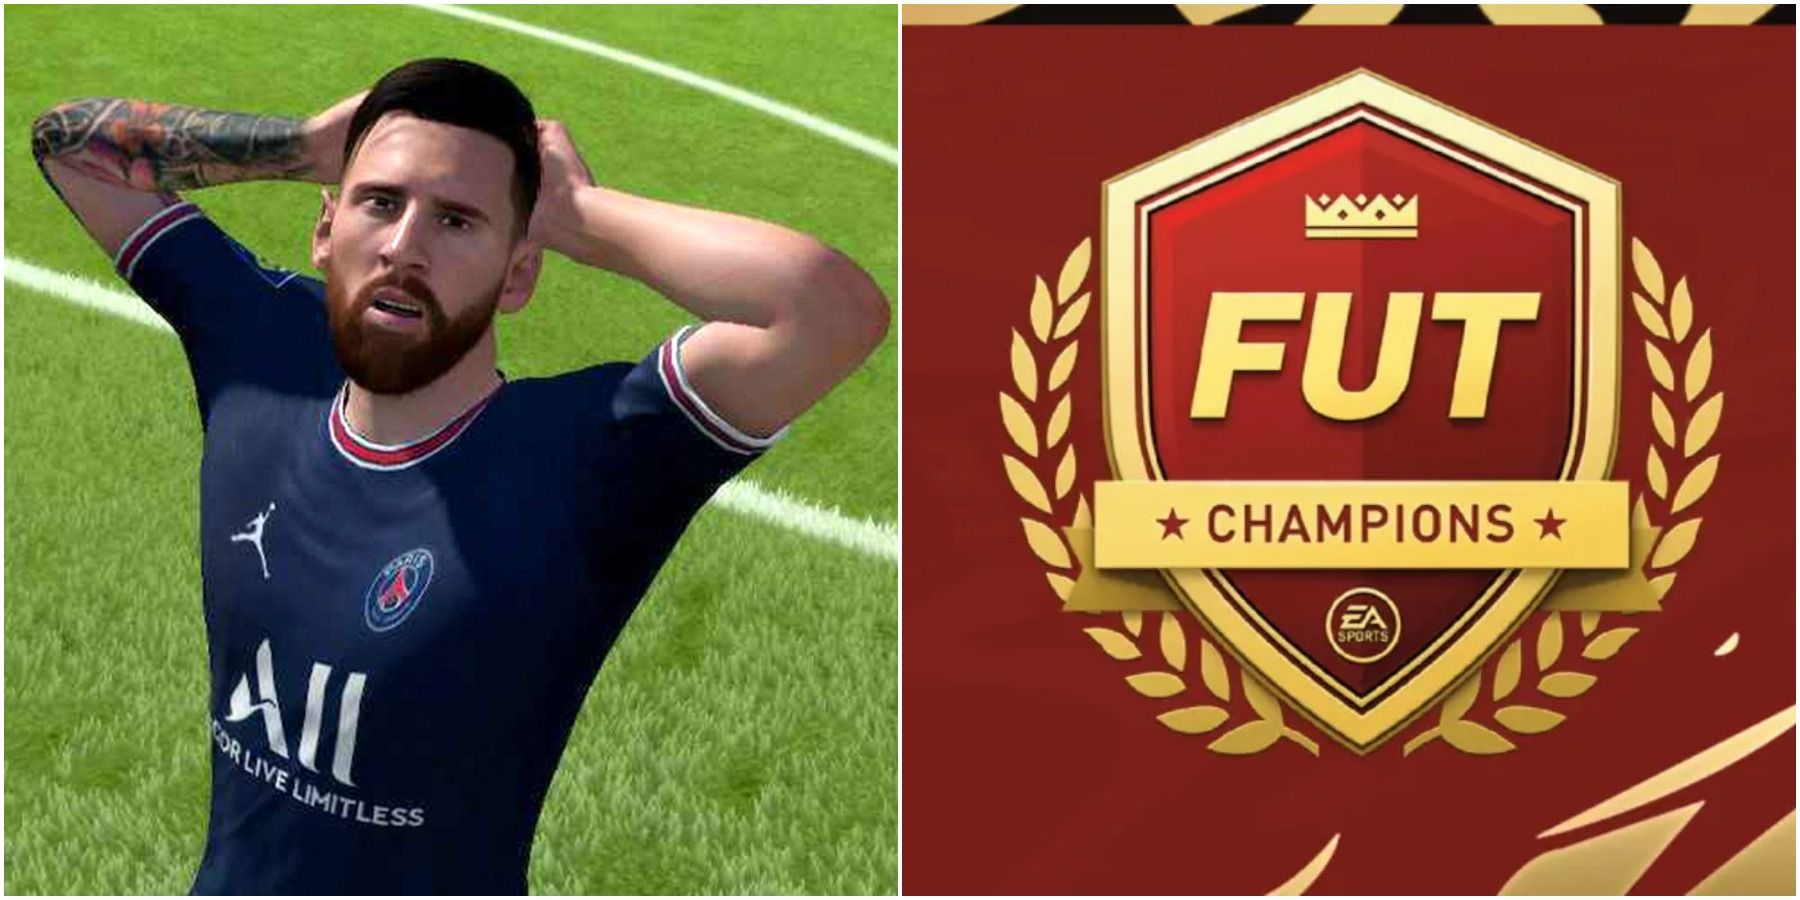 (Left) Messi looking dissapointed (Right) FUT Champtions logo